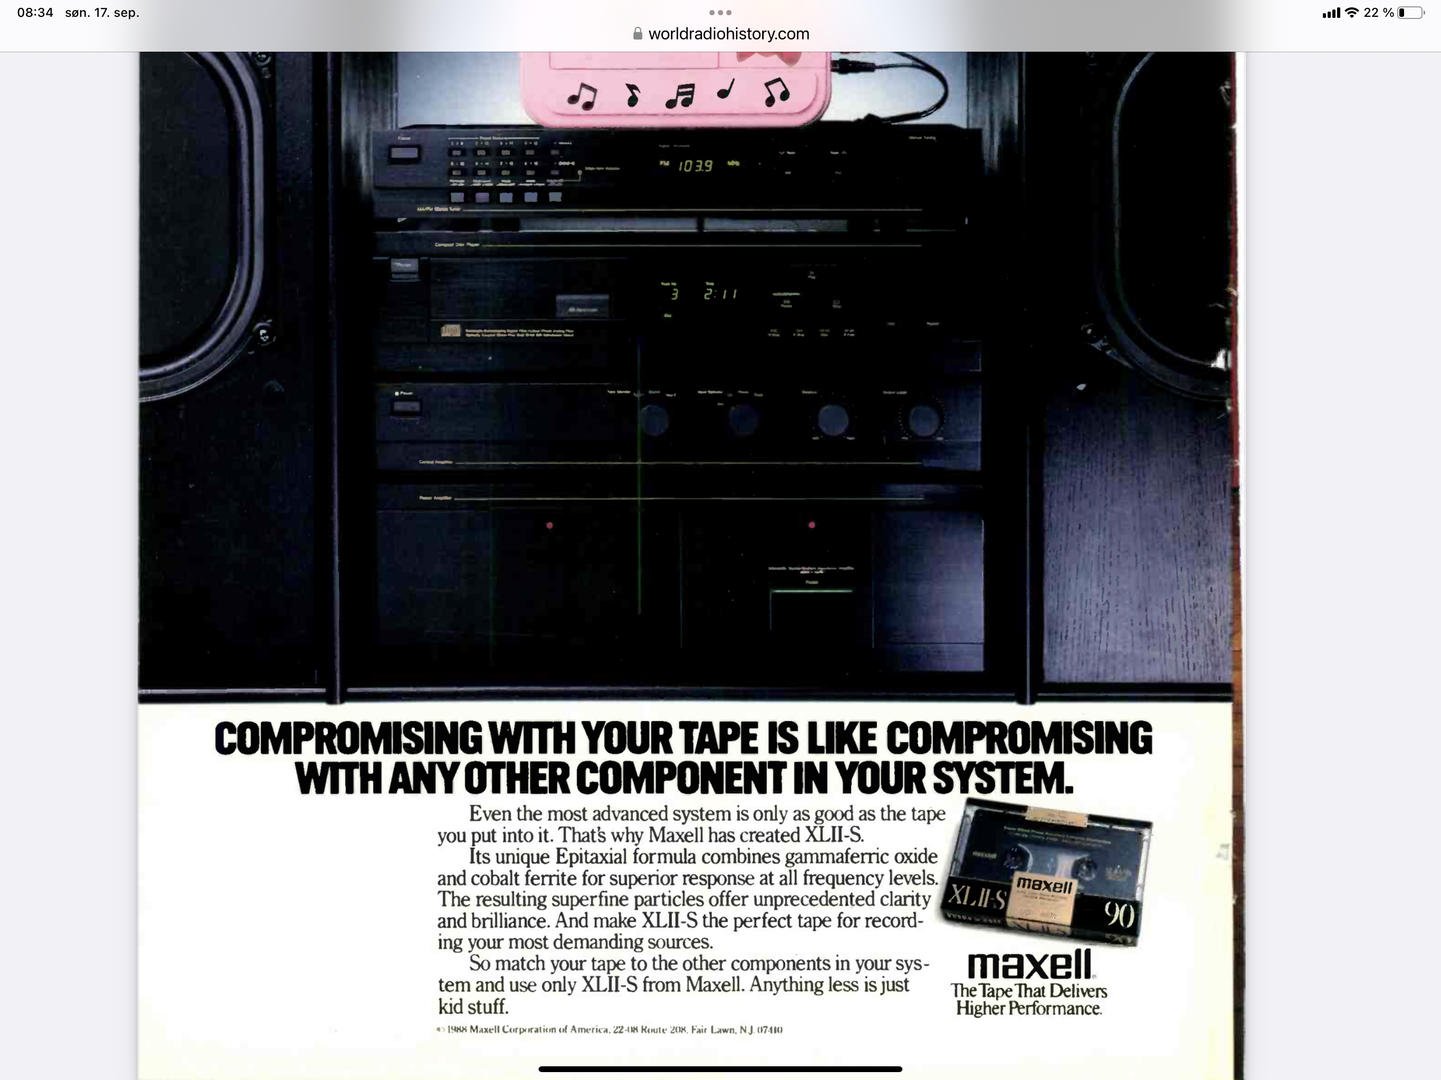 Maxell reklame-1989.png